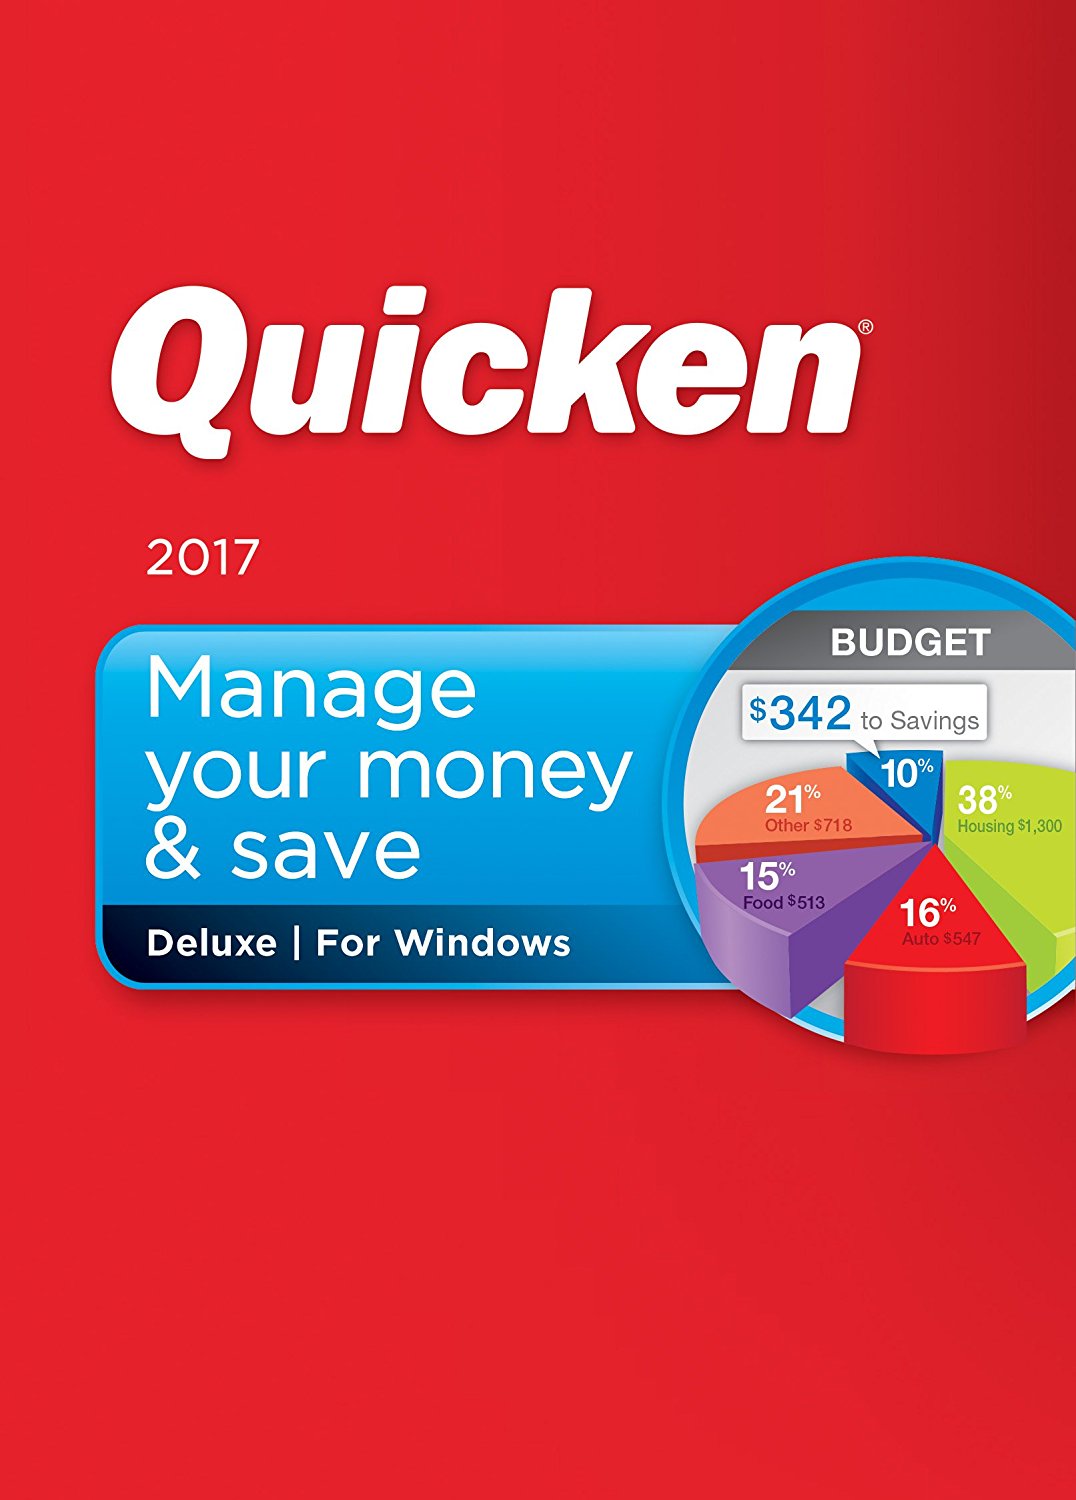 promo on TurboTax 2016 and Quicken 2017 